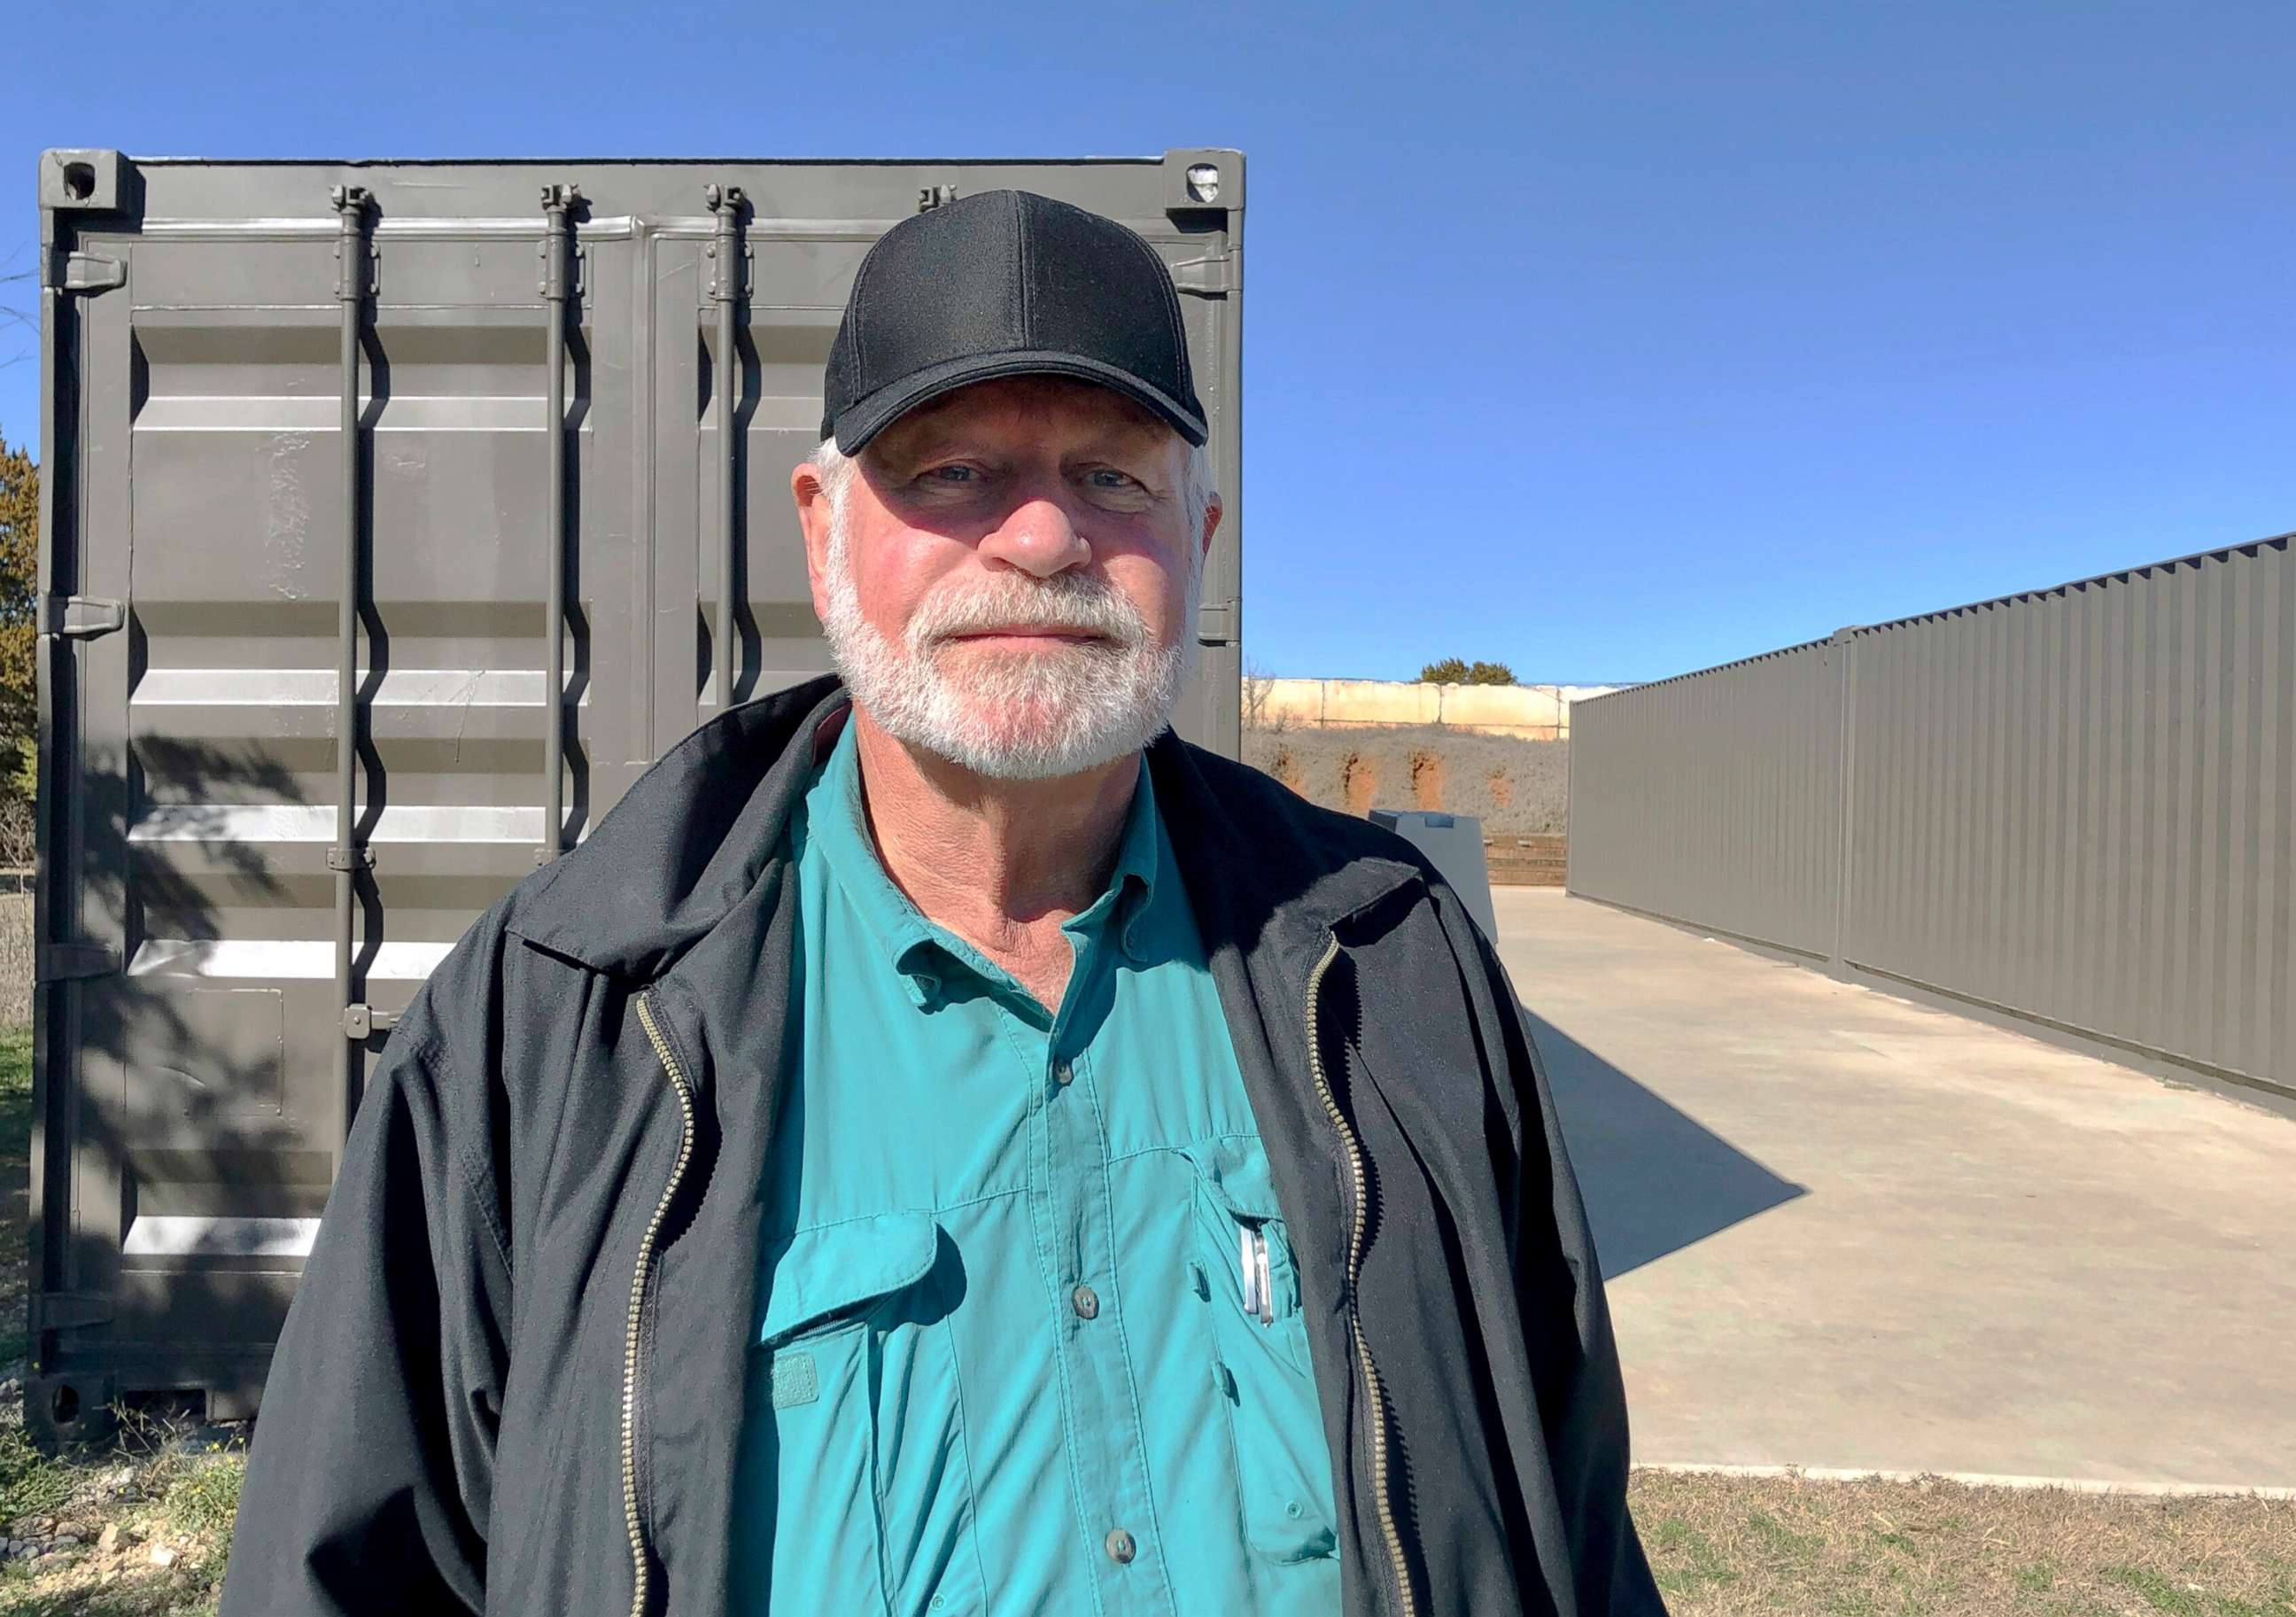 PHOTO: Jack Wilson, 71, poses for a photo at a firing range outside his home in Granbury, Texas, Dec. 30, 2019.